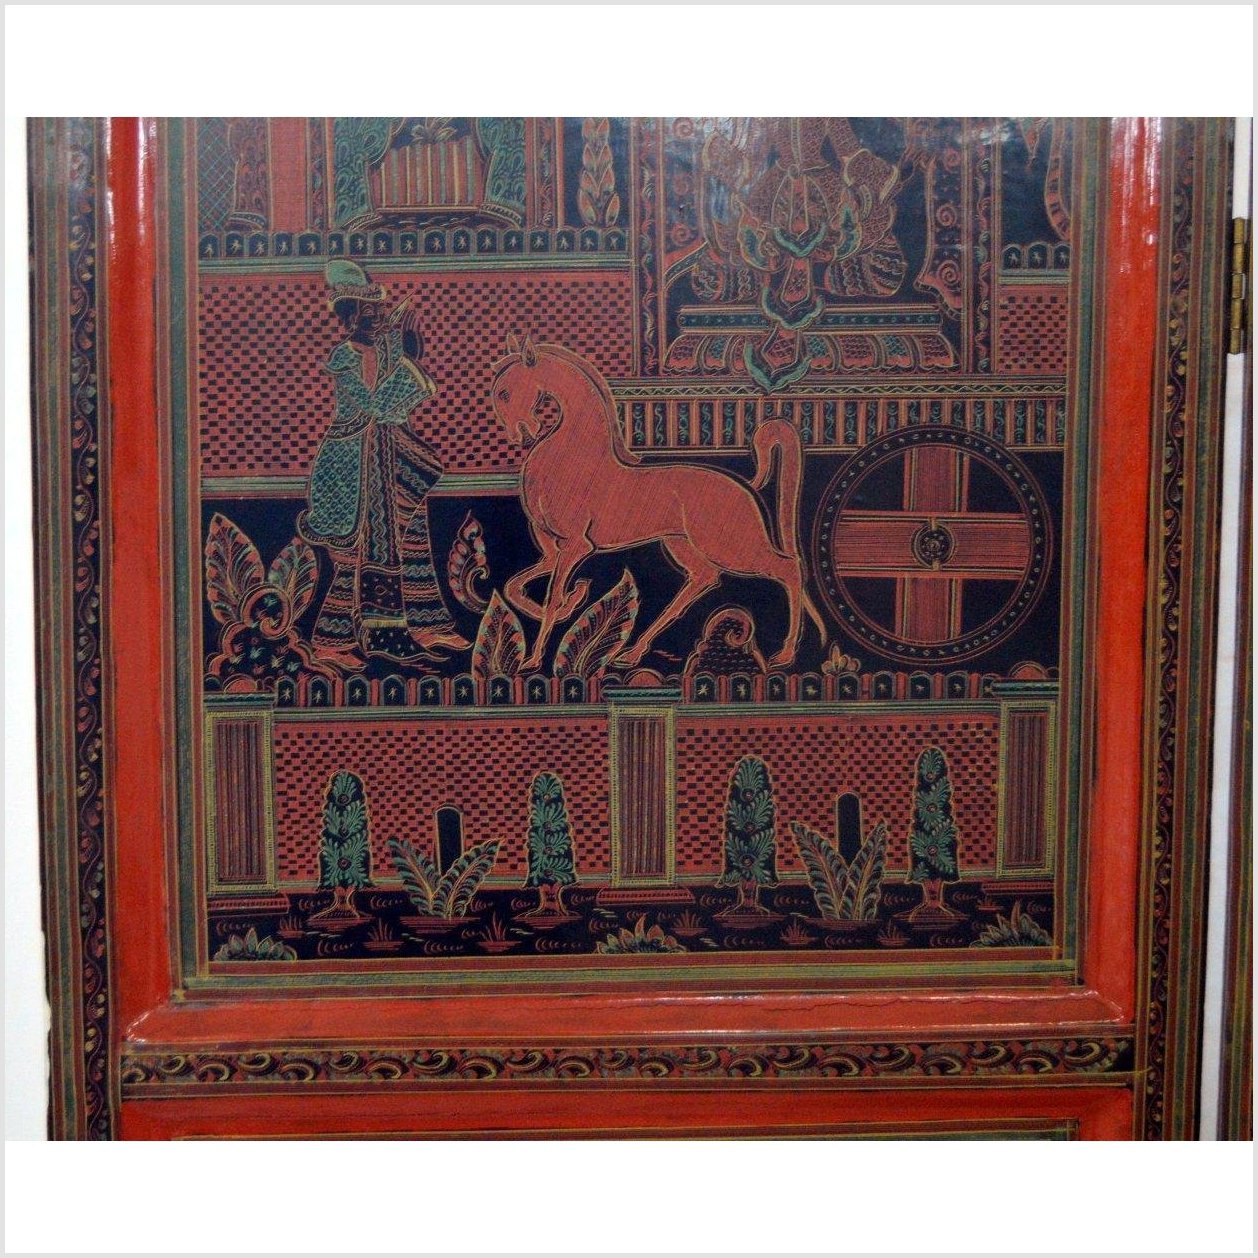 4-Panel Middle Eastern Art Inspired Screen-YN2844-13. Asian & Chinese Furniture, Art, Antiques, Vintage Home Décor for sale at FEA Home